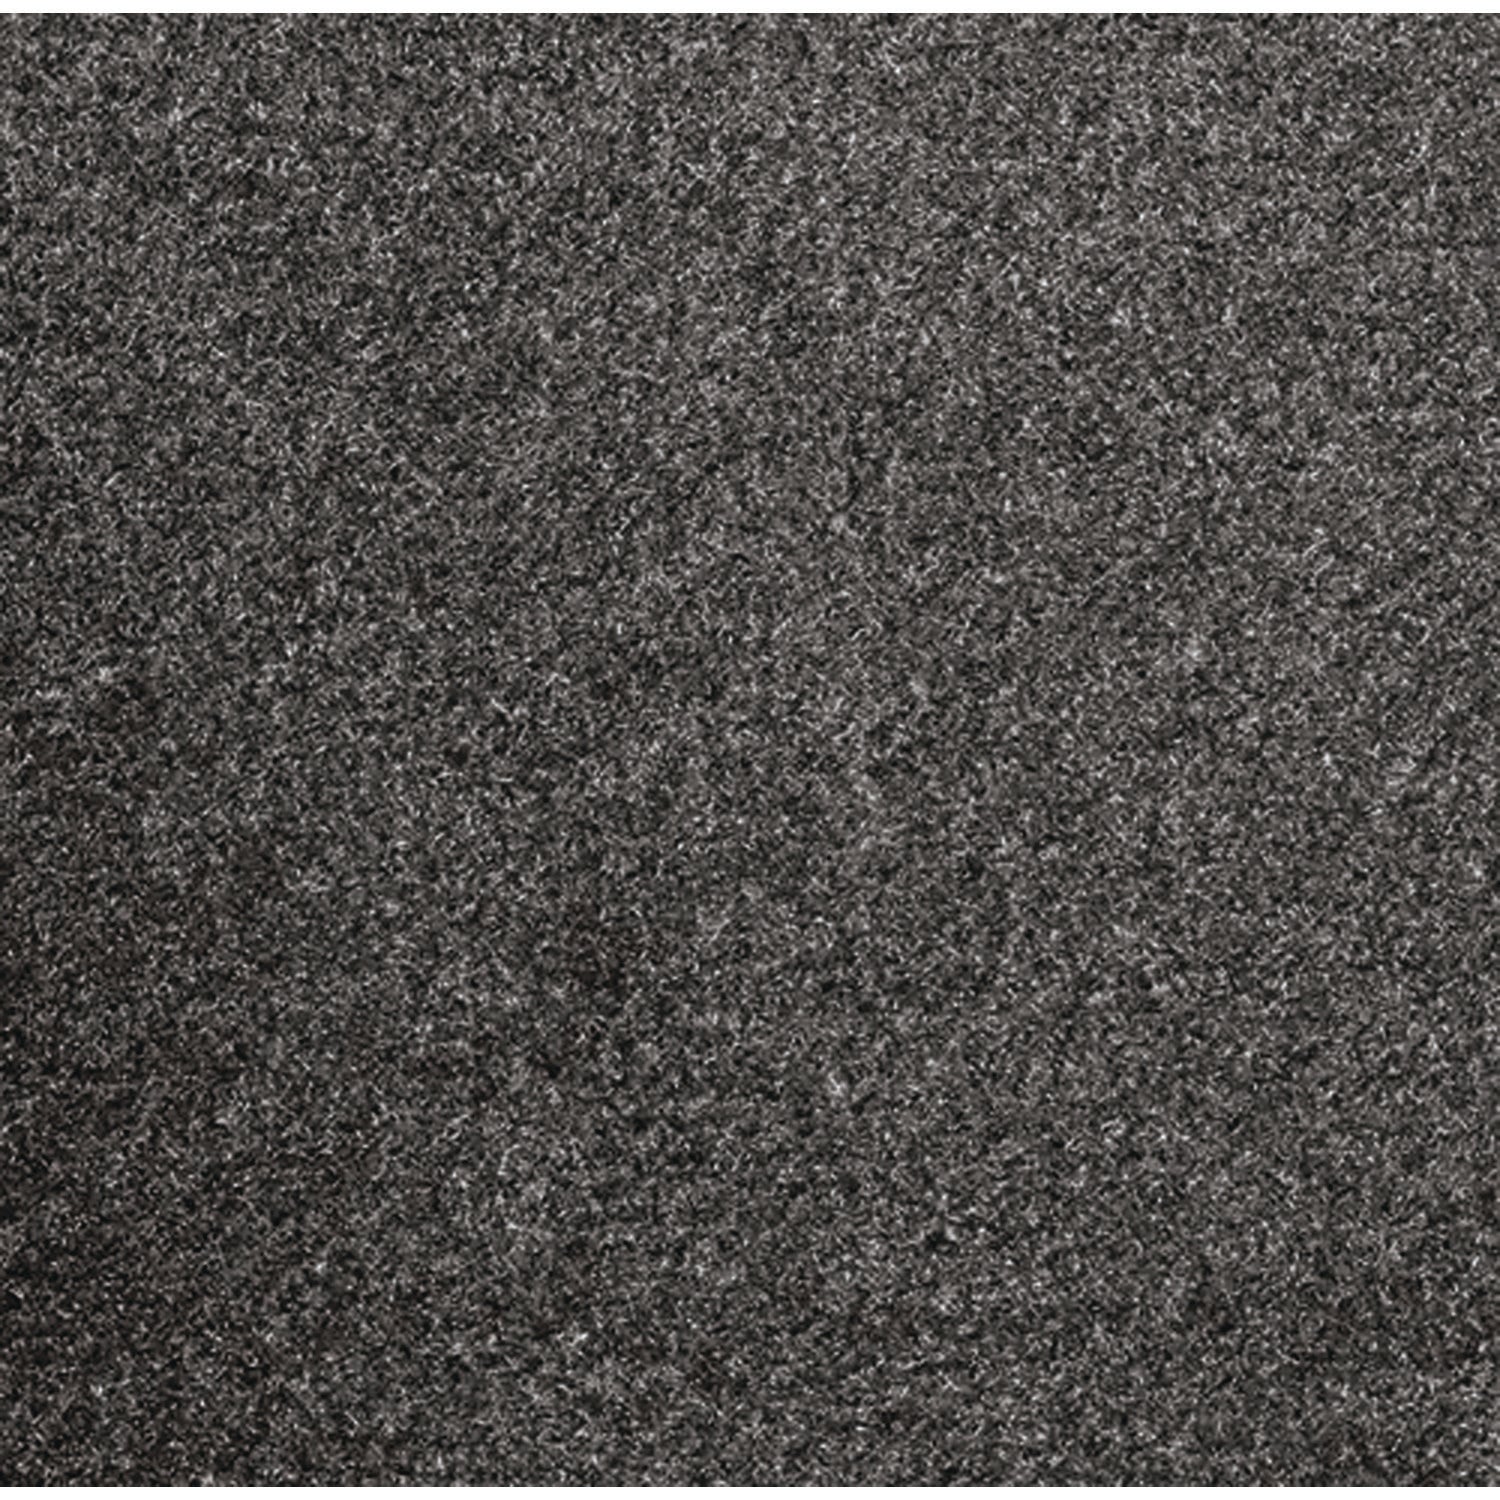 Rely-On Olefin Indoor Wiper Mat, 36 x 48, Charcoal - 4